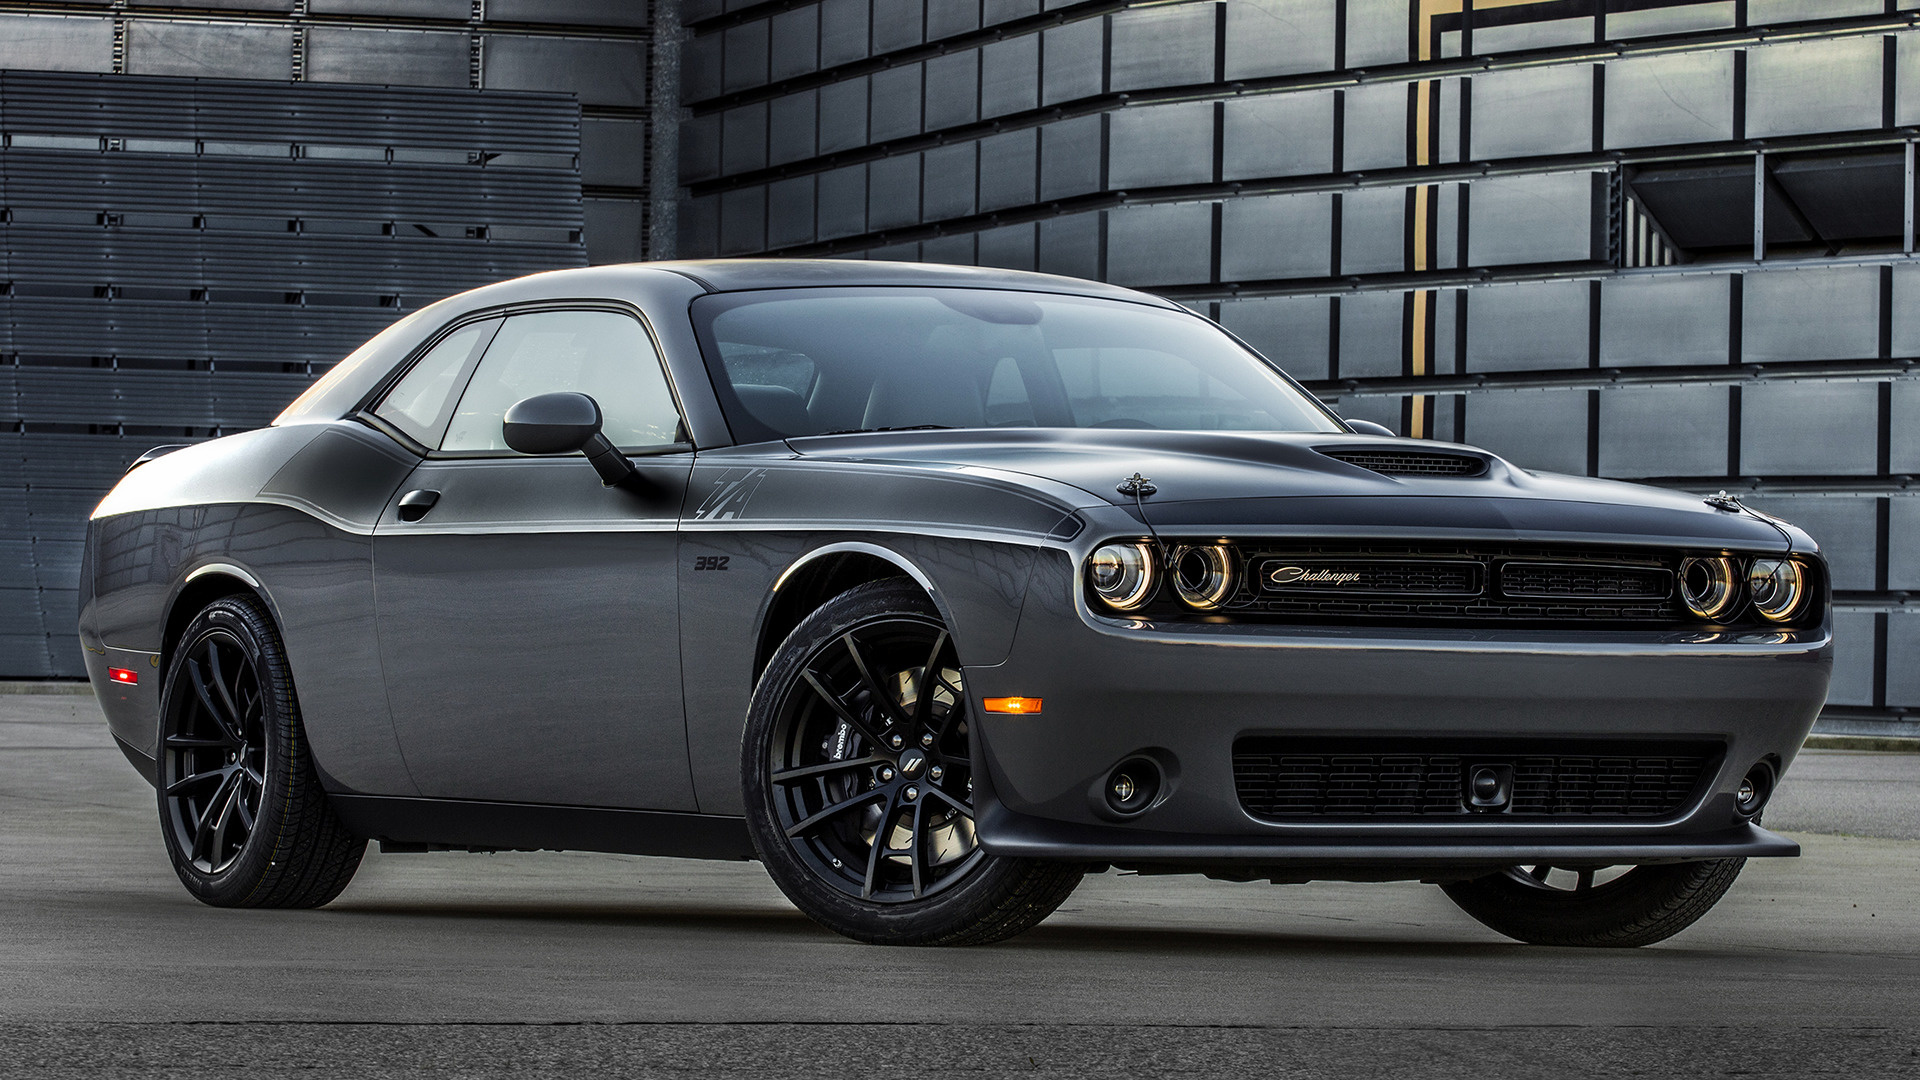 Dodge Challenger T/A 392 (2017) Wallpapers and HD Images - Car Pixel